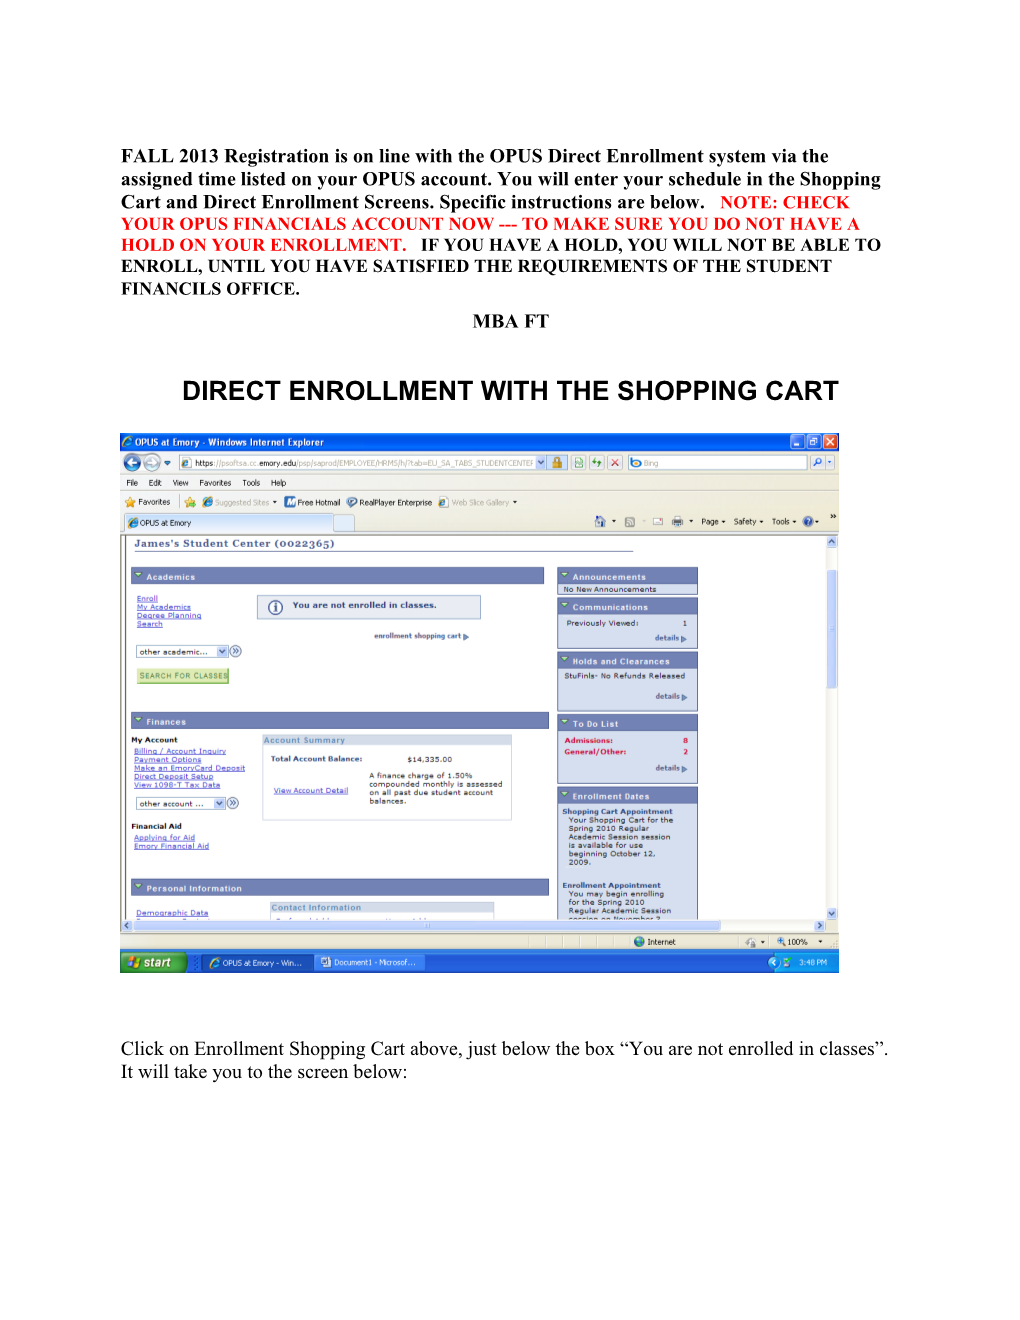 Direct Enrollment with the Shopping Cart